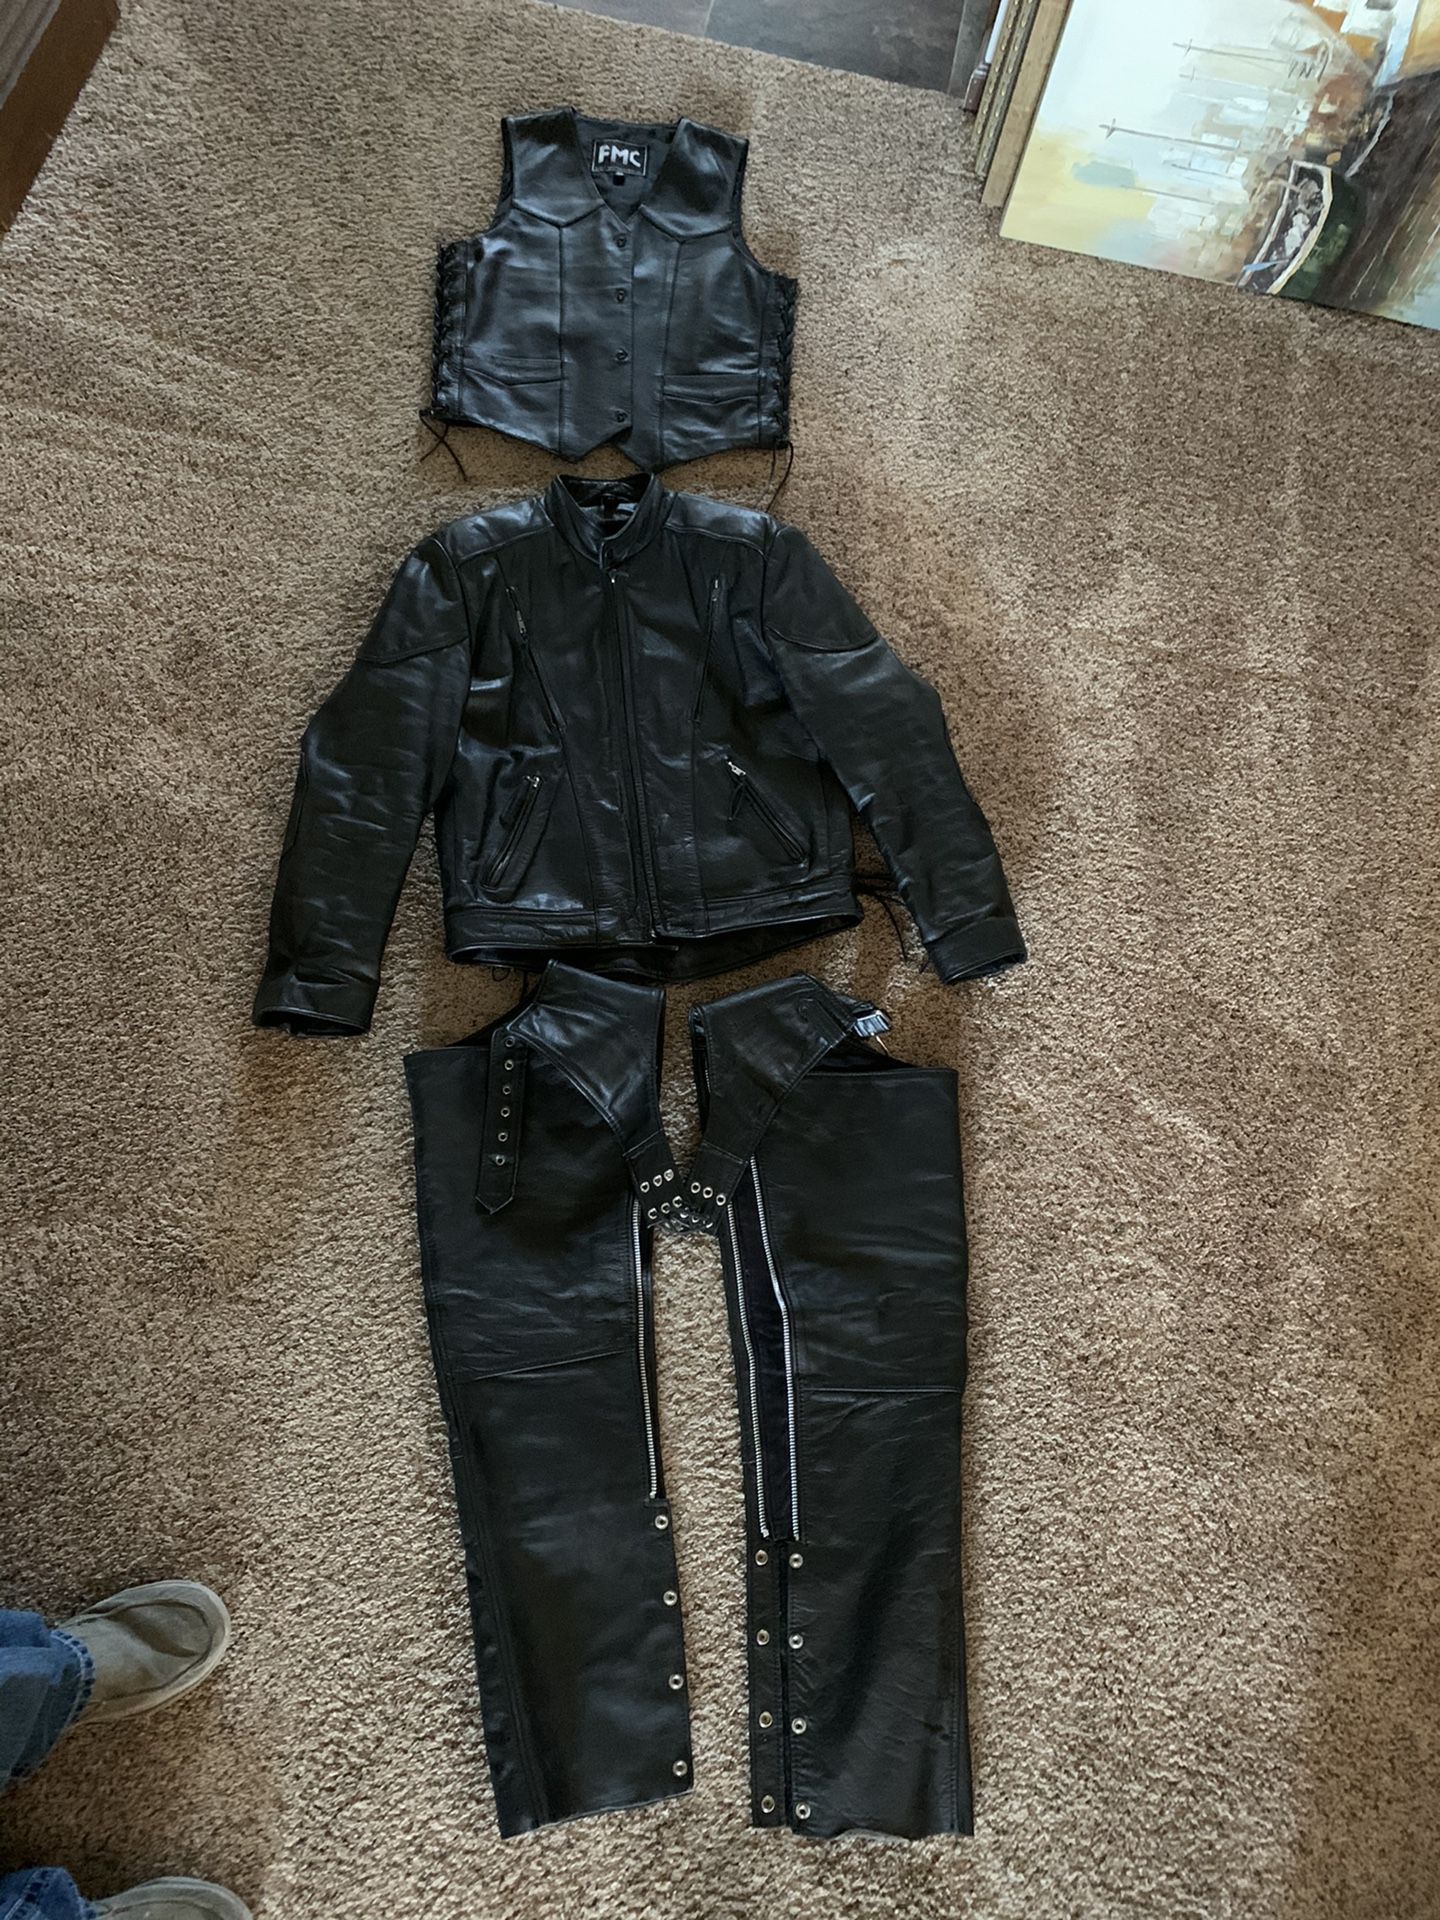 Full Leather Riding Gear